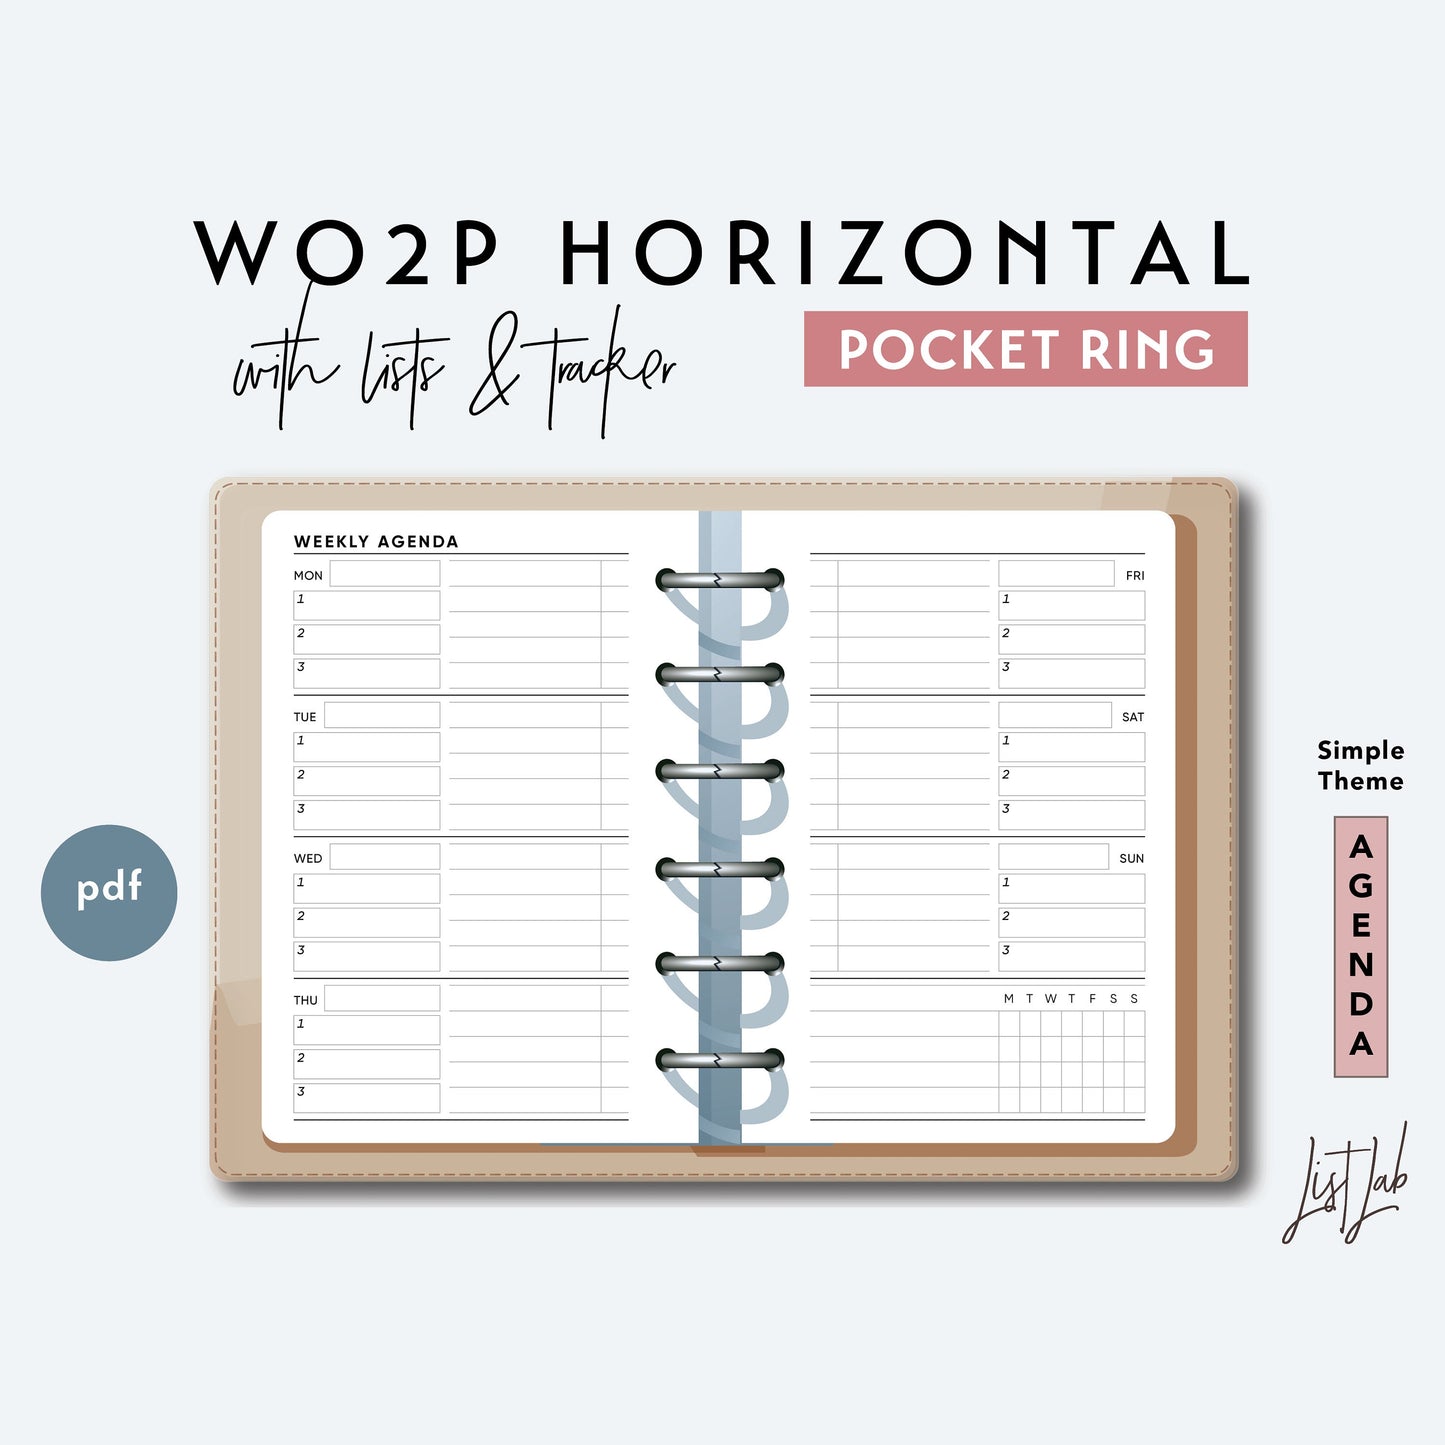 Pocket Ring WO2P Horizontal - with Lists and Tracker Printable Insert Set